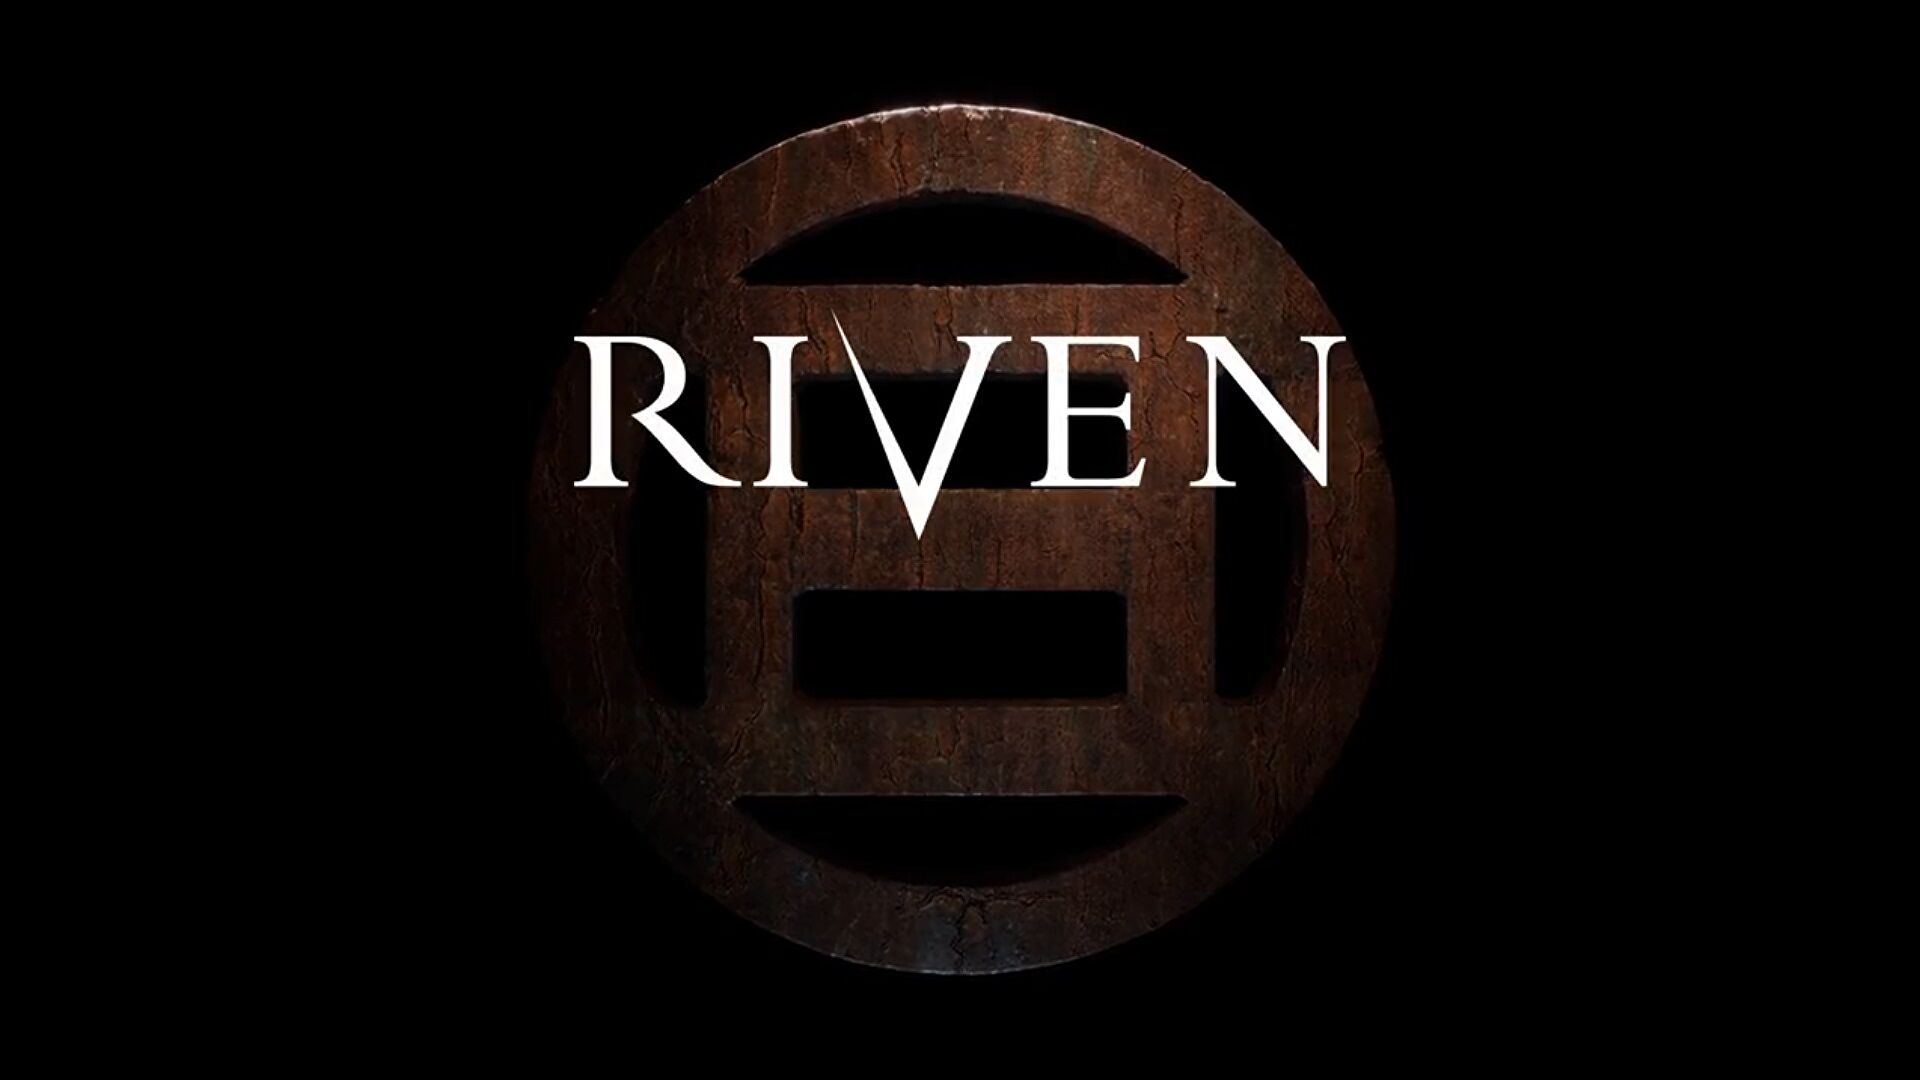 Riven gets remake 25 years after original release